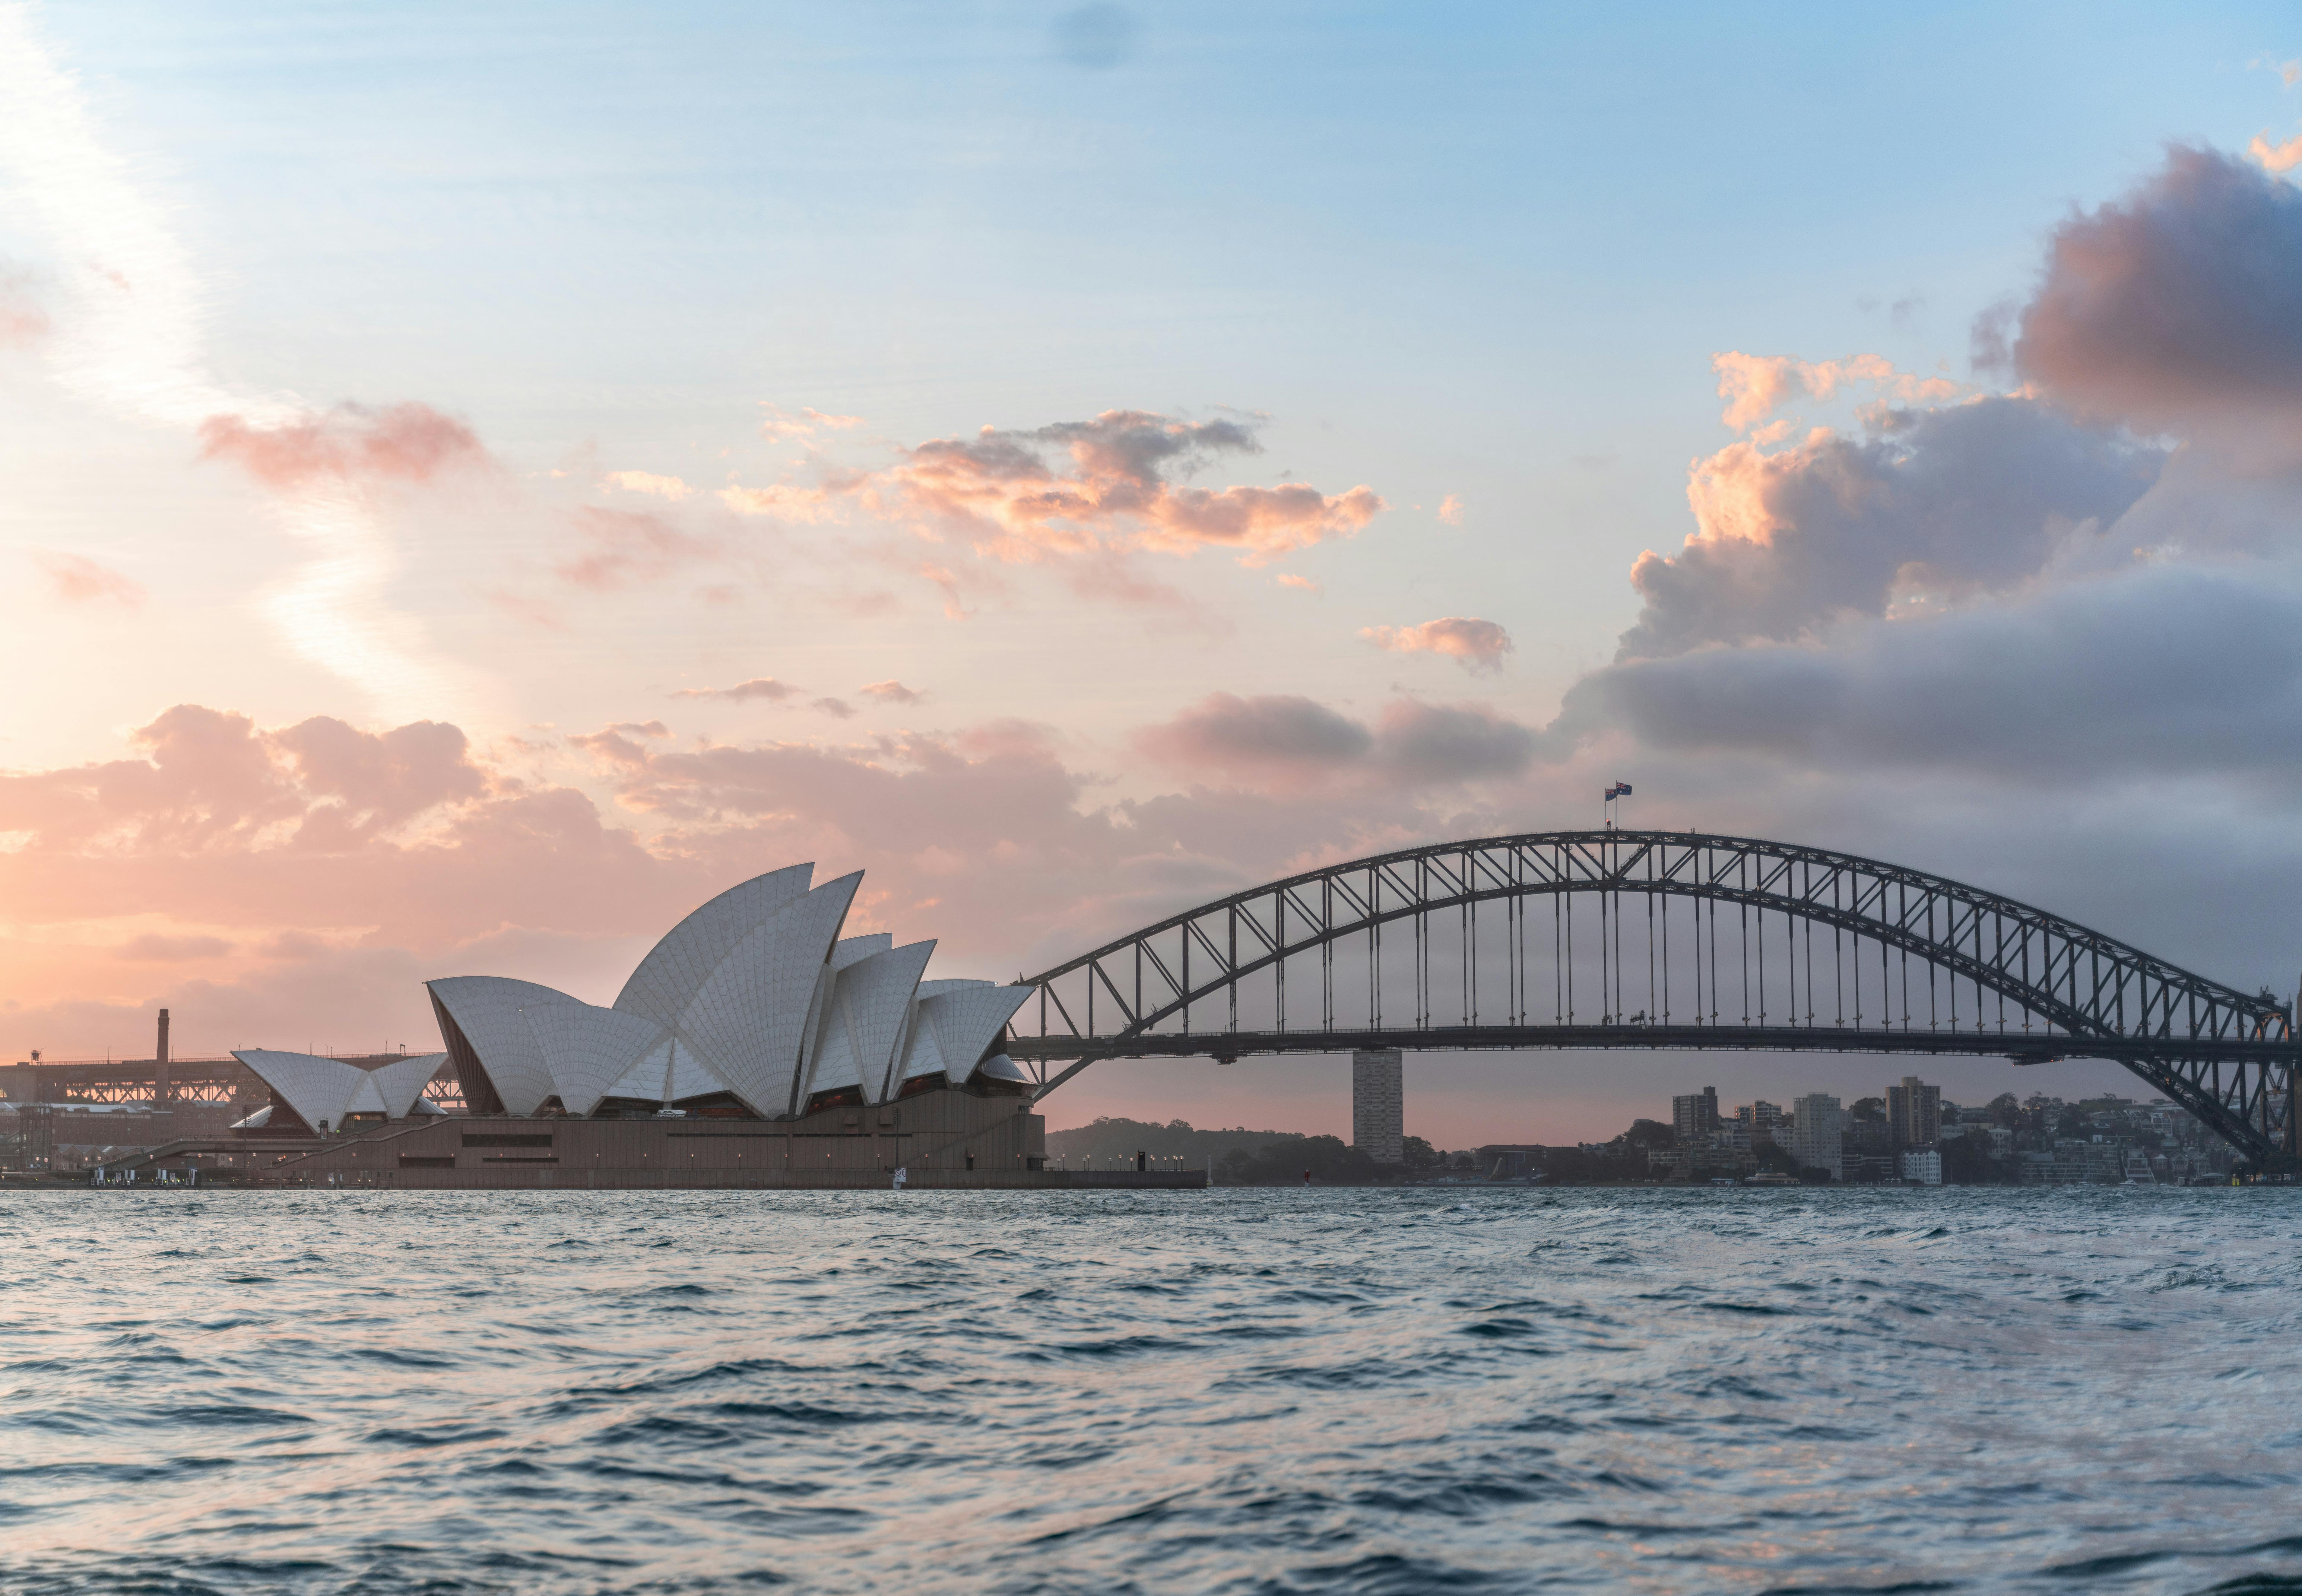 Early-stage decarbonization guide for Australia and New Zealand